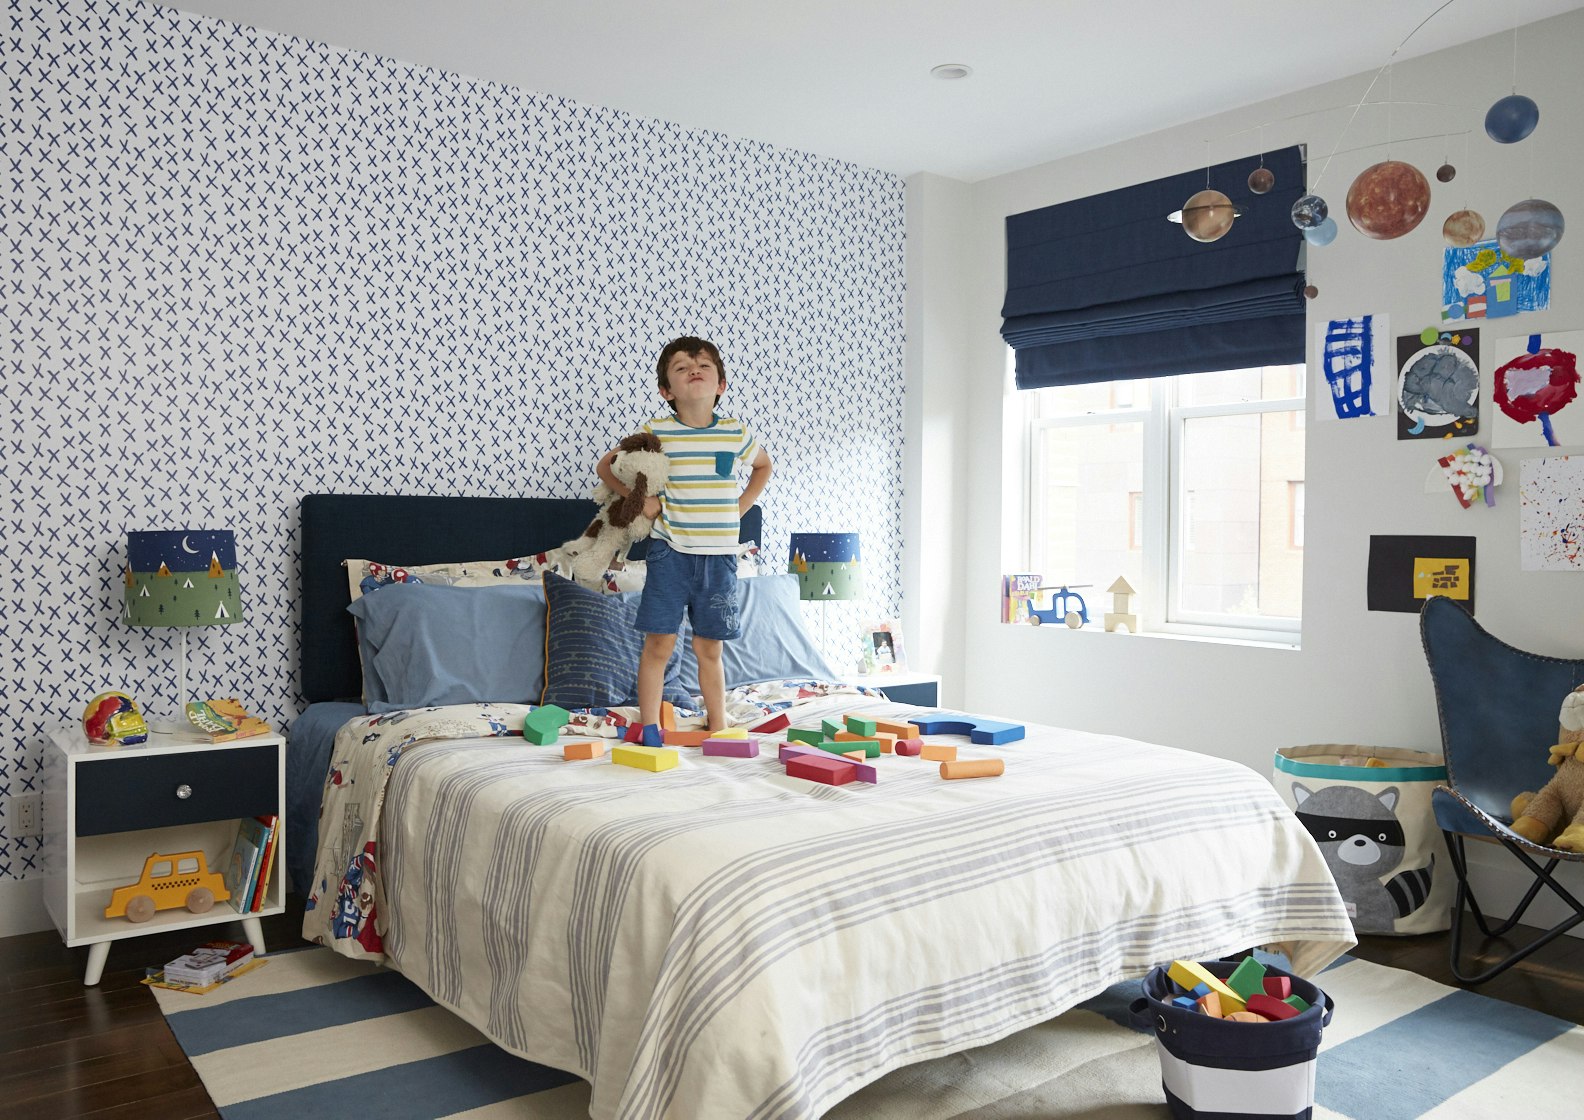 How to Design a Room That Grows Up With Your Kids - Dwell